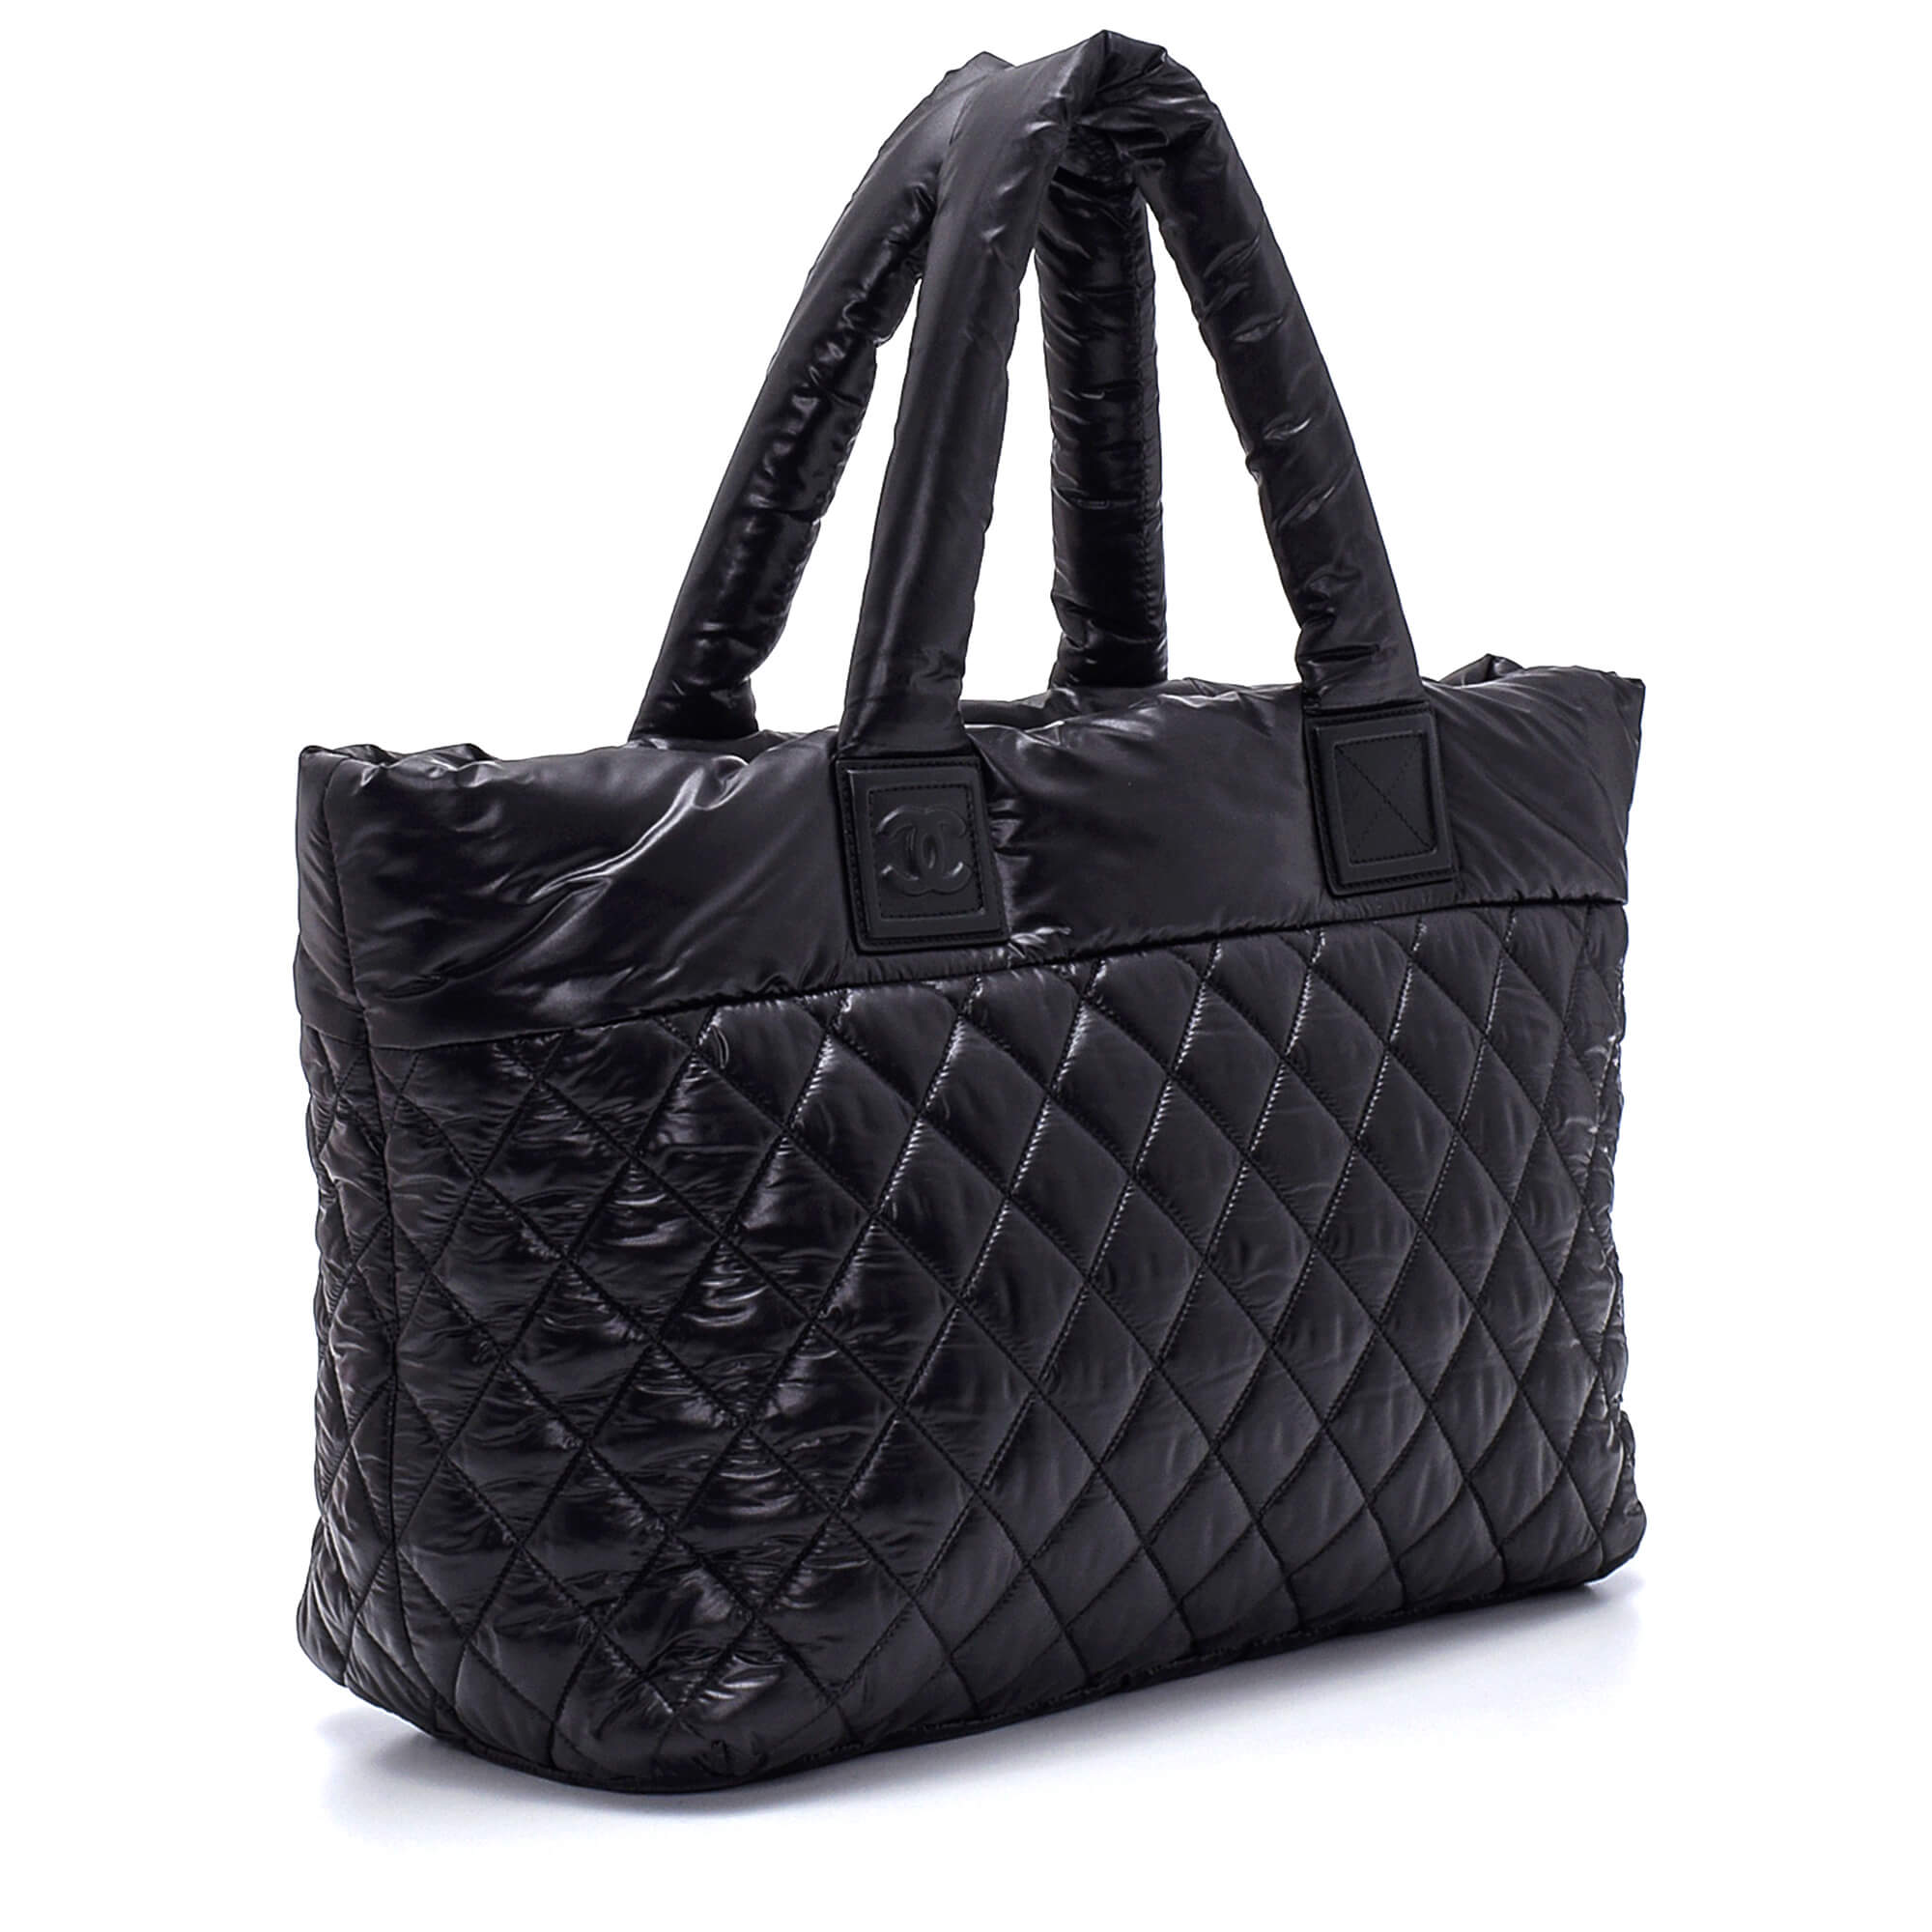 Chanel - Black Quilted Nylon Coco Cocoon Tote Bag II